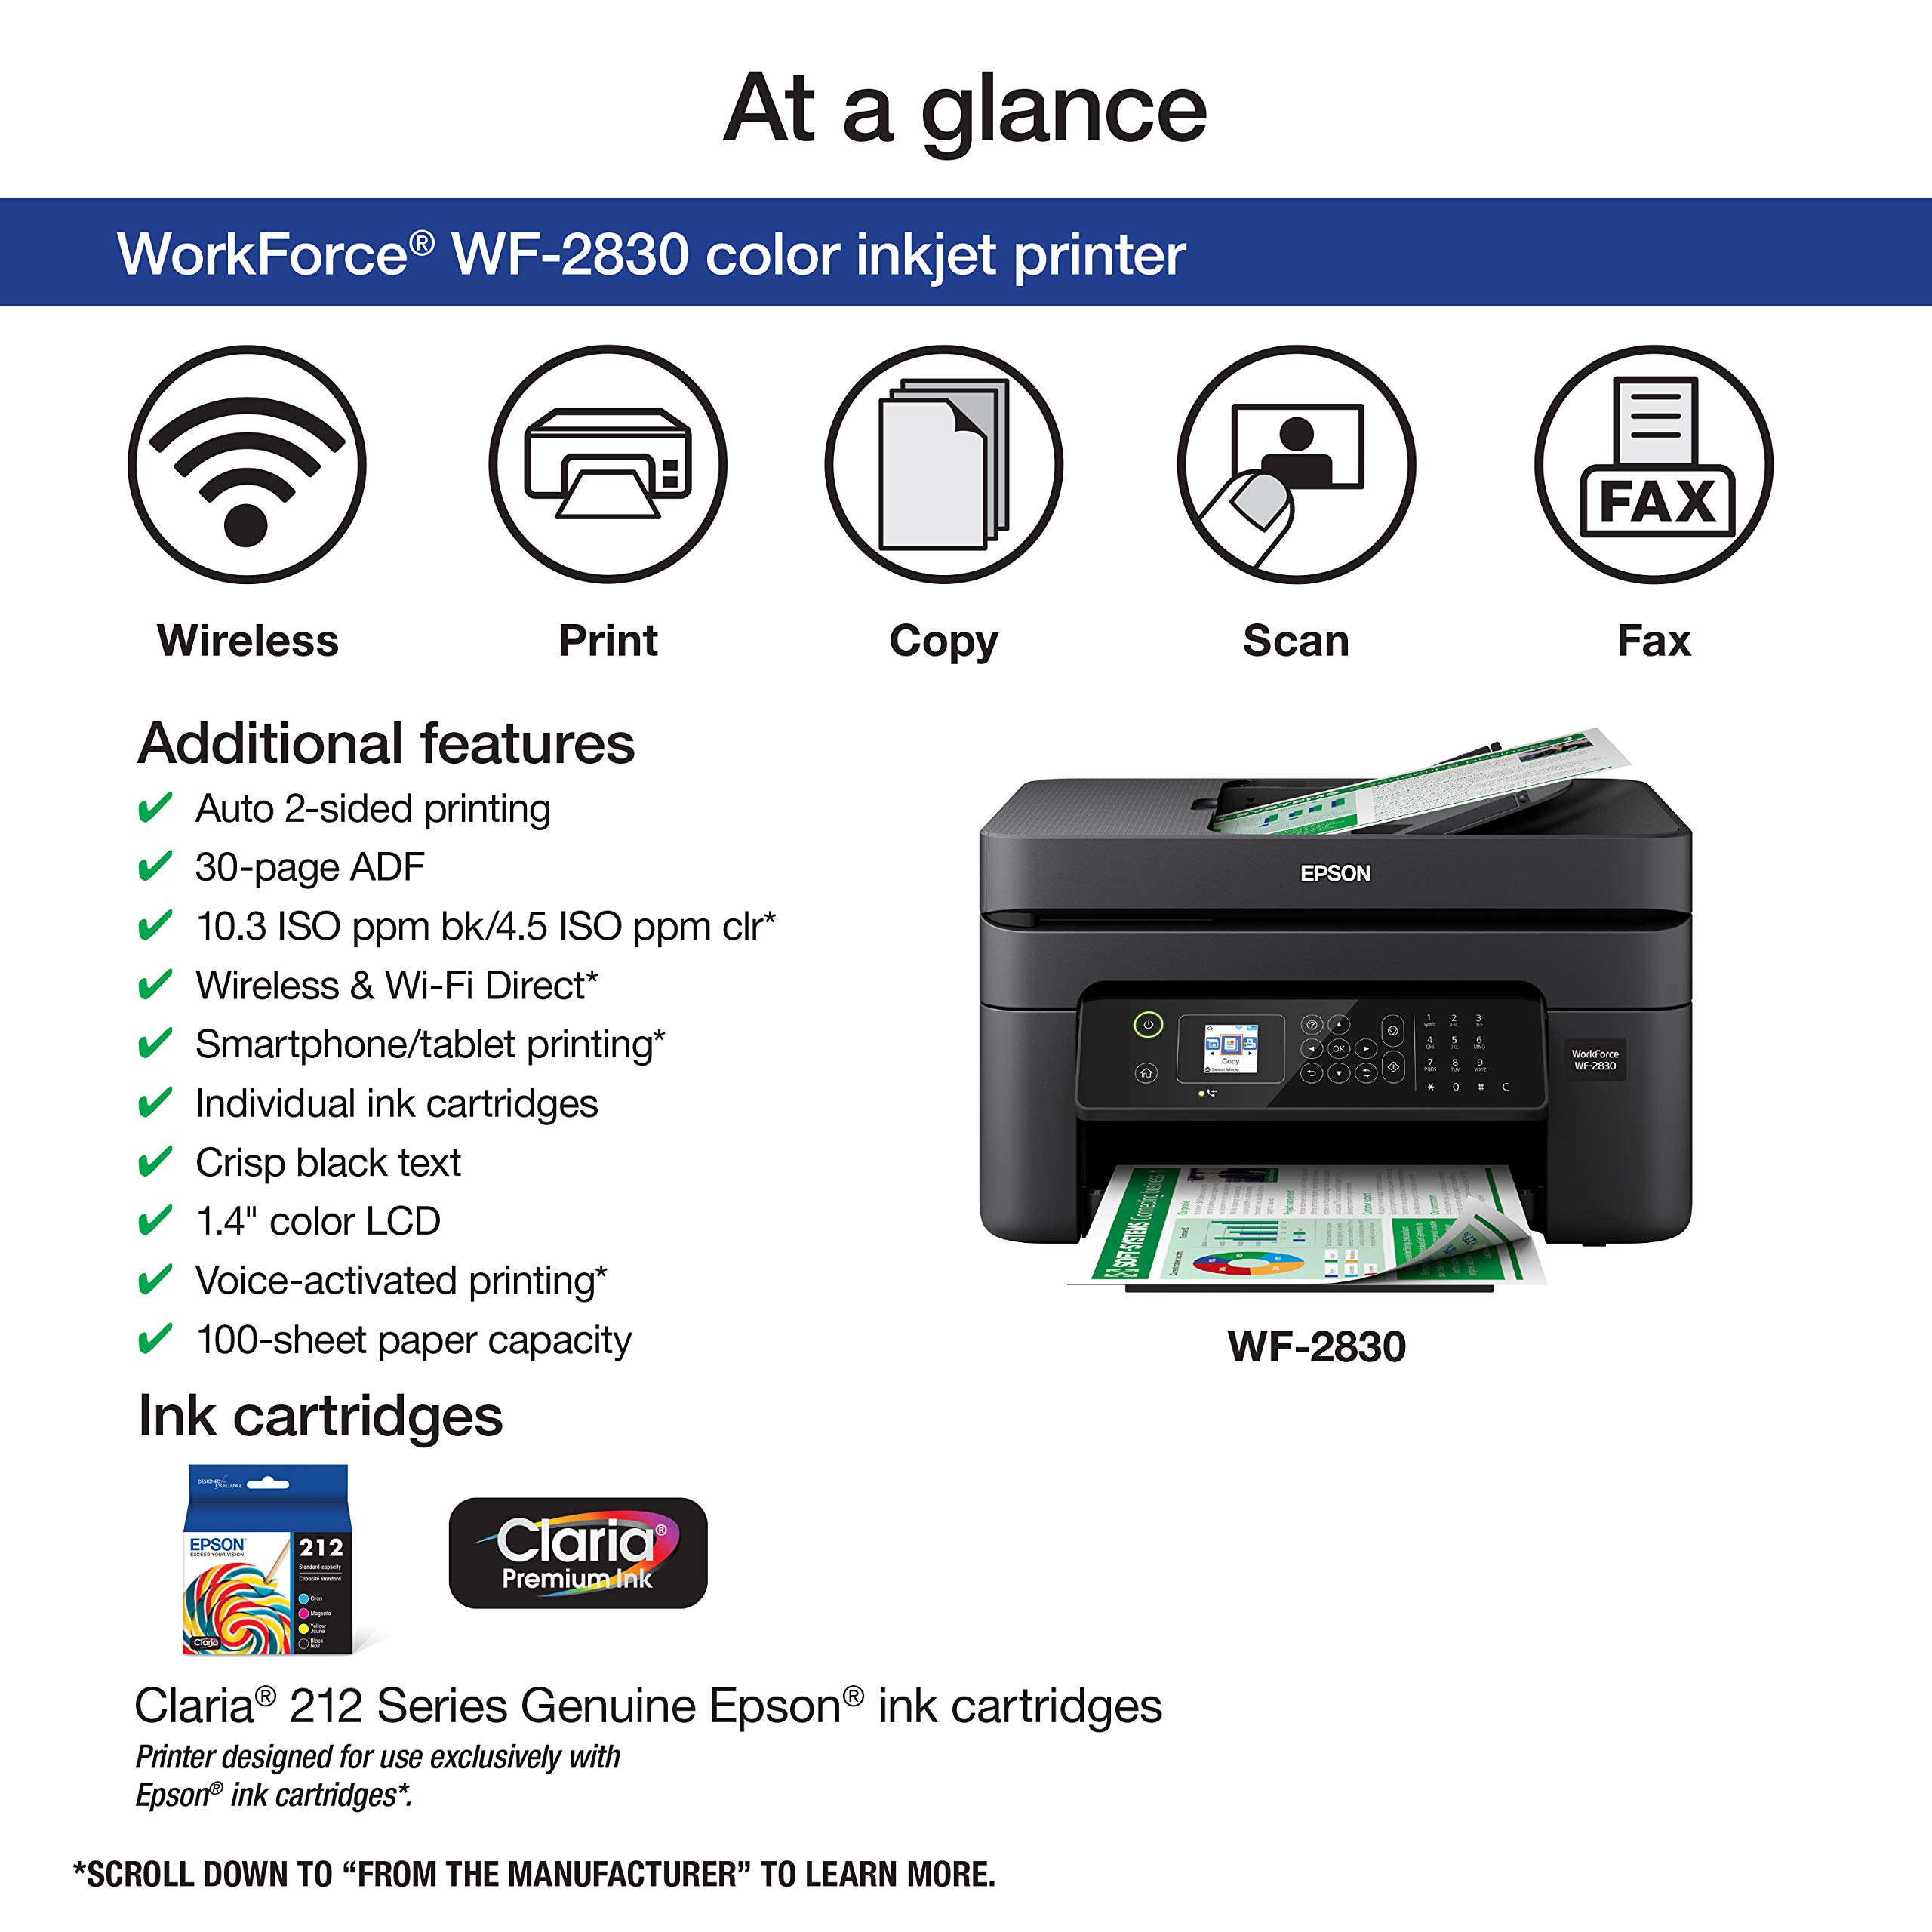 Epson Workforce WF-2930 Wireless All-in-One Printer with Scan, Copy, Fax, Auto Document Feeder, Automatic 2-Sided Printing and 1.4